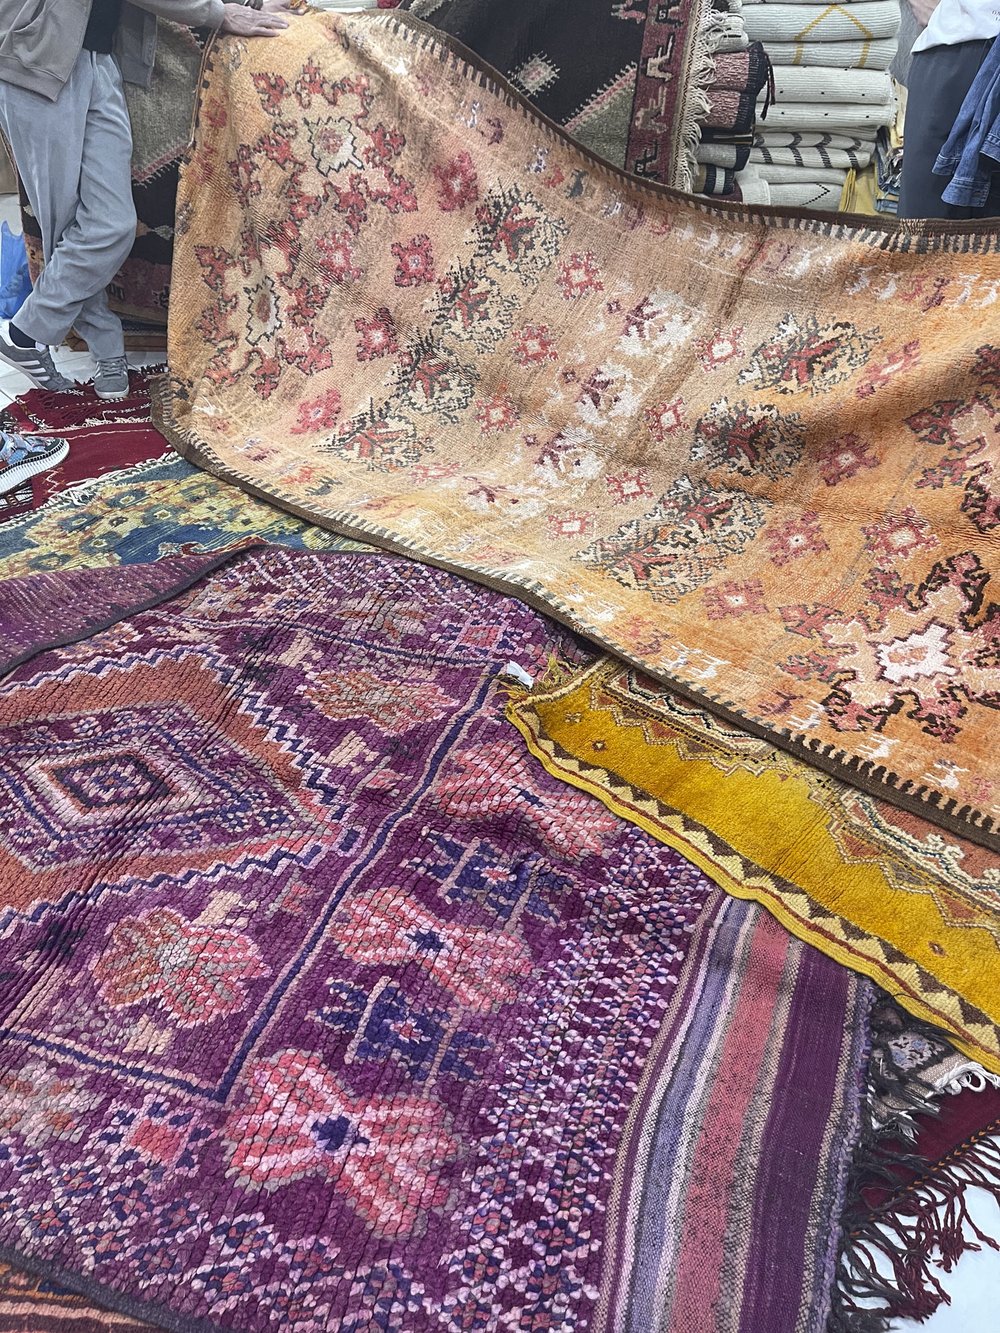 Authentic Moroccan rugs